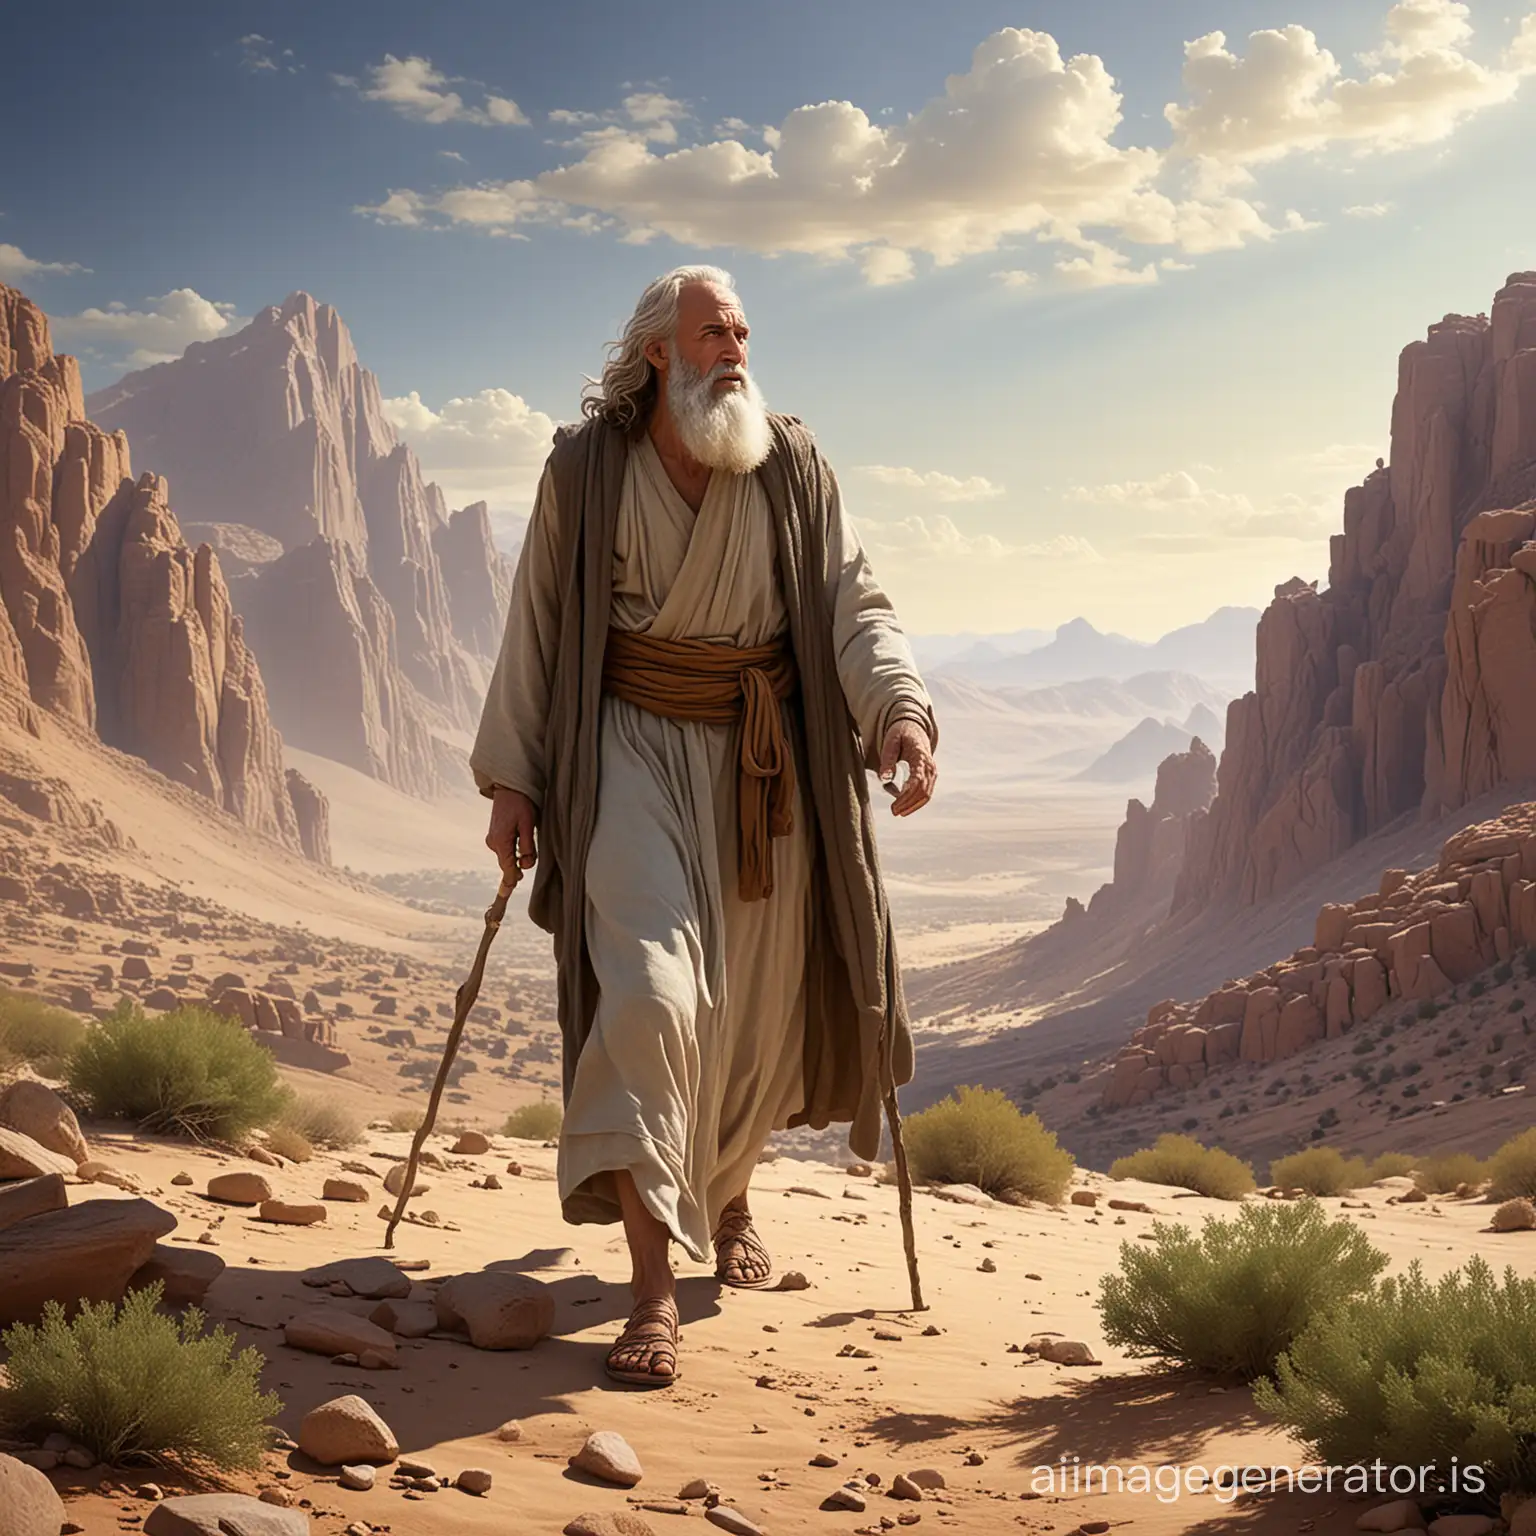 As Prophet Moses wandered the desert, he ascended a towering mountain in his humble, poor dress, seeking guidance and wisdom in the solitude of the wilderness. Craft a narrative detailing his spiritual journey and the revelations he uncovered at the summit.